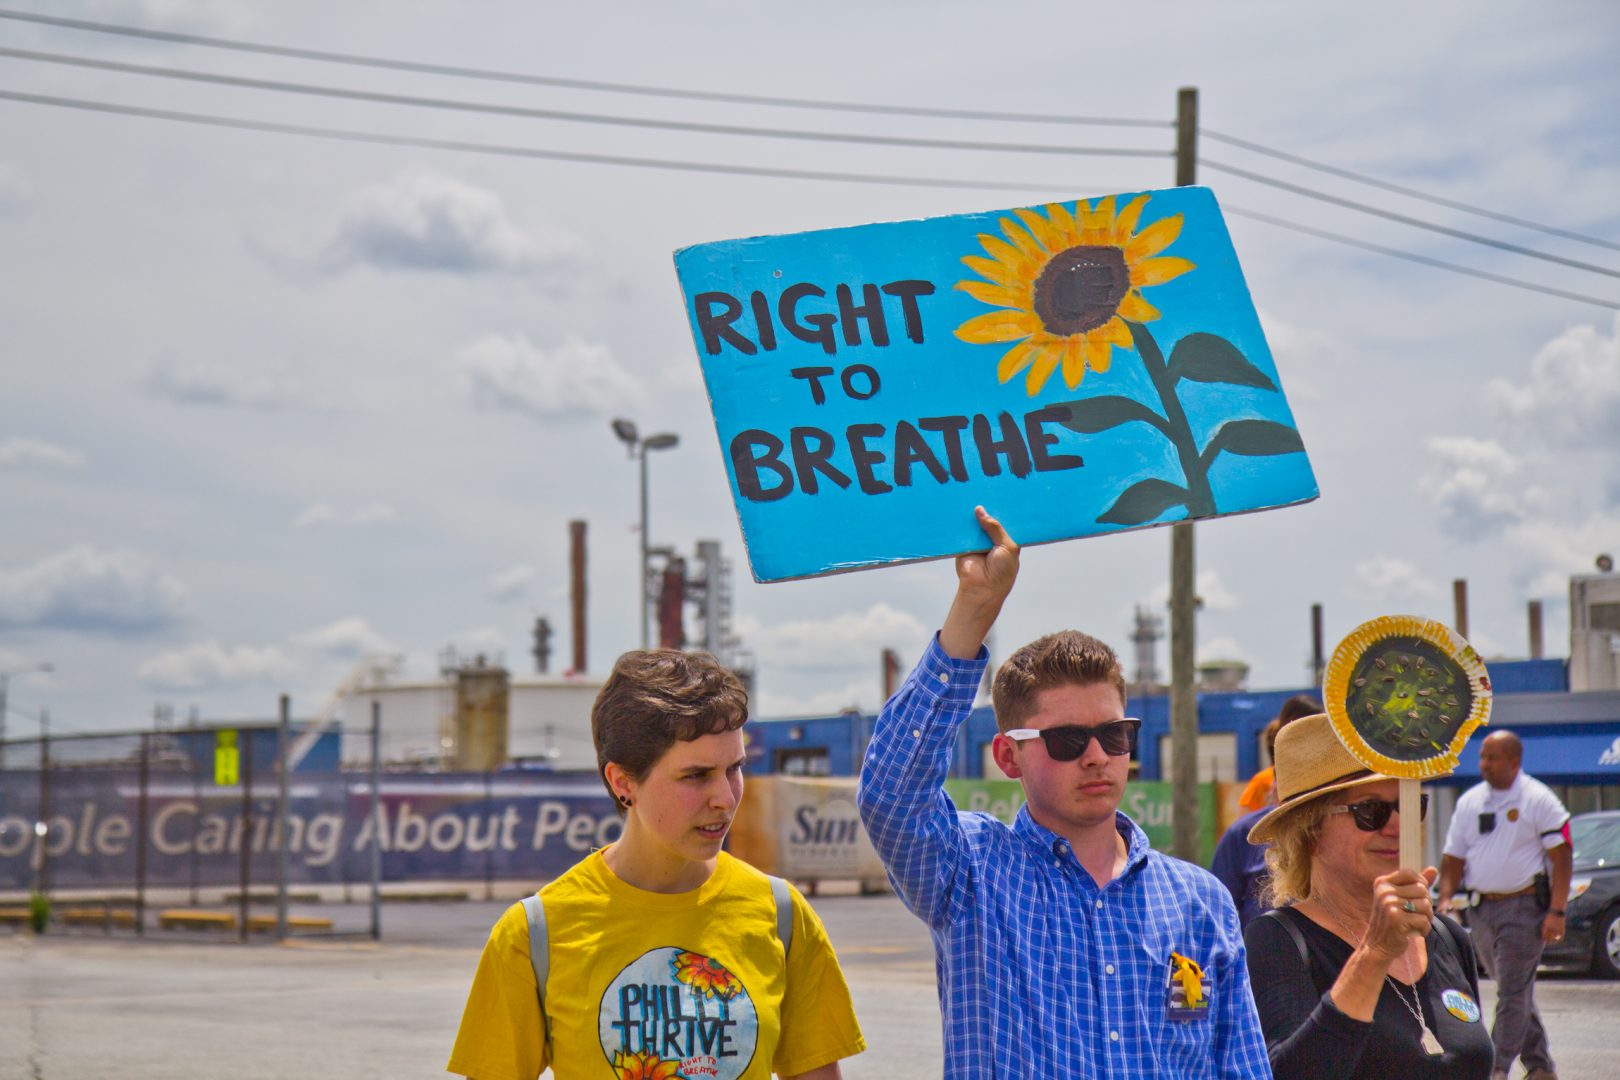 Protestors demand an environmental overhaul to the energy industry in Philadelphia. (Kimberly Paynter/WHYY)